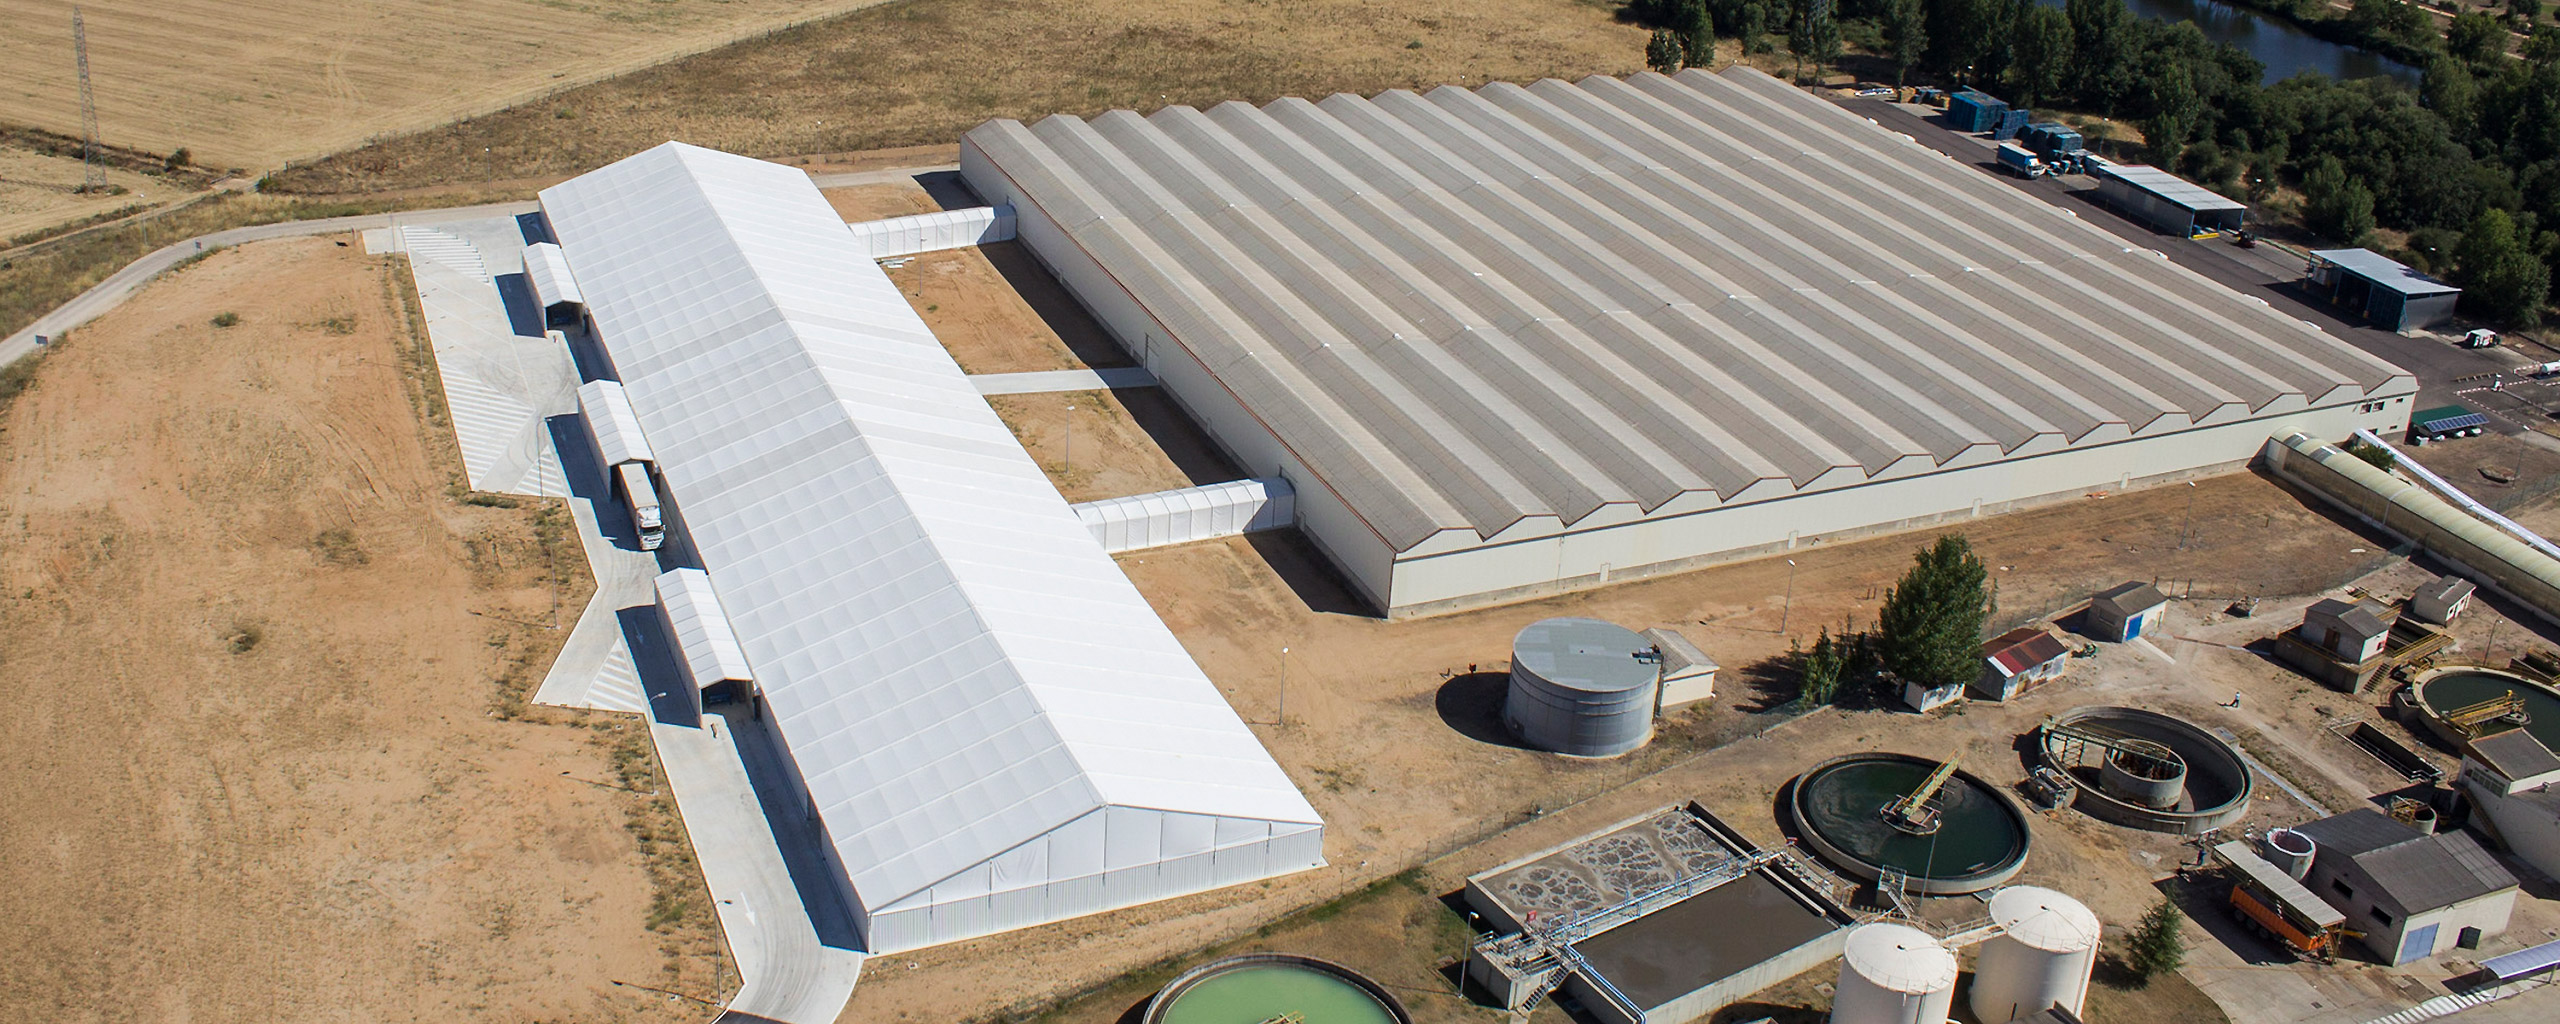 Kimberly Clark Storage Halls - a very big tent in terms of length - birds eye view